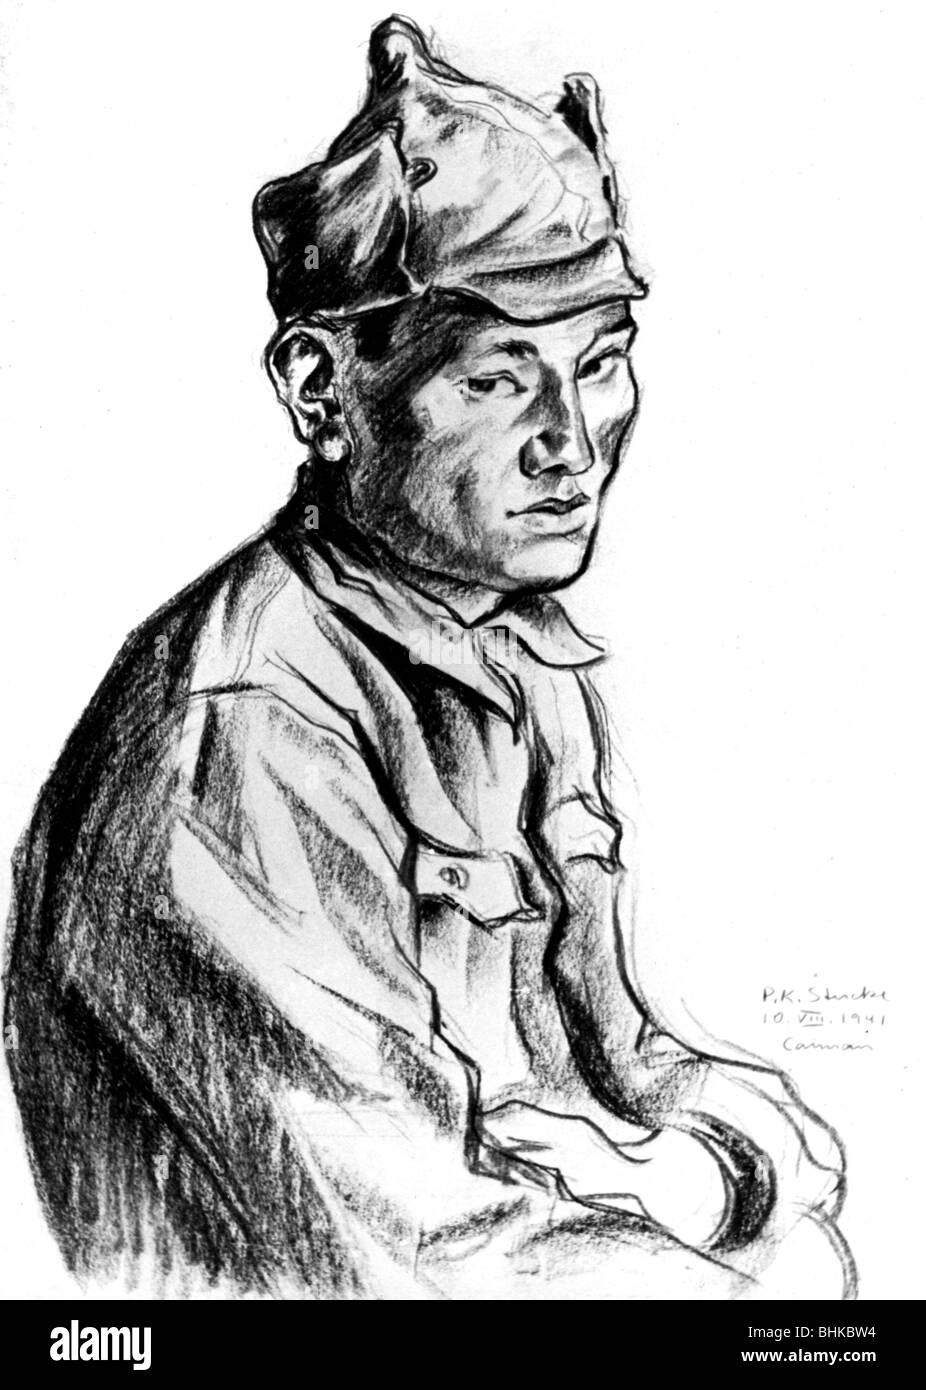 events, Second World War / WWII, prisoners of war, captured Soviet soldier, drawing, made by the German war correspondant Stucke, 10.8.1941, Stock Photo